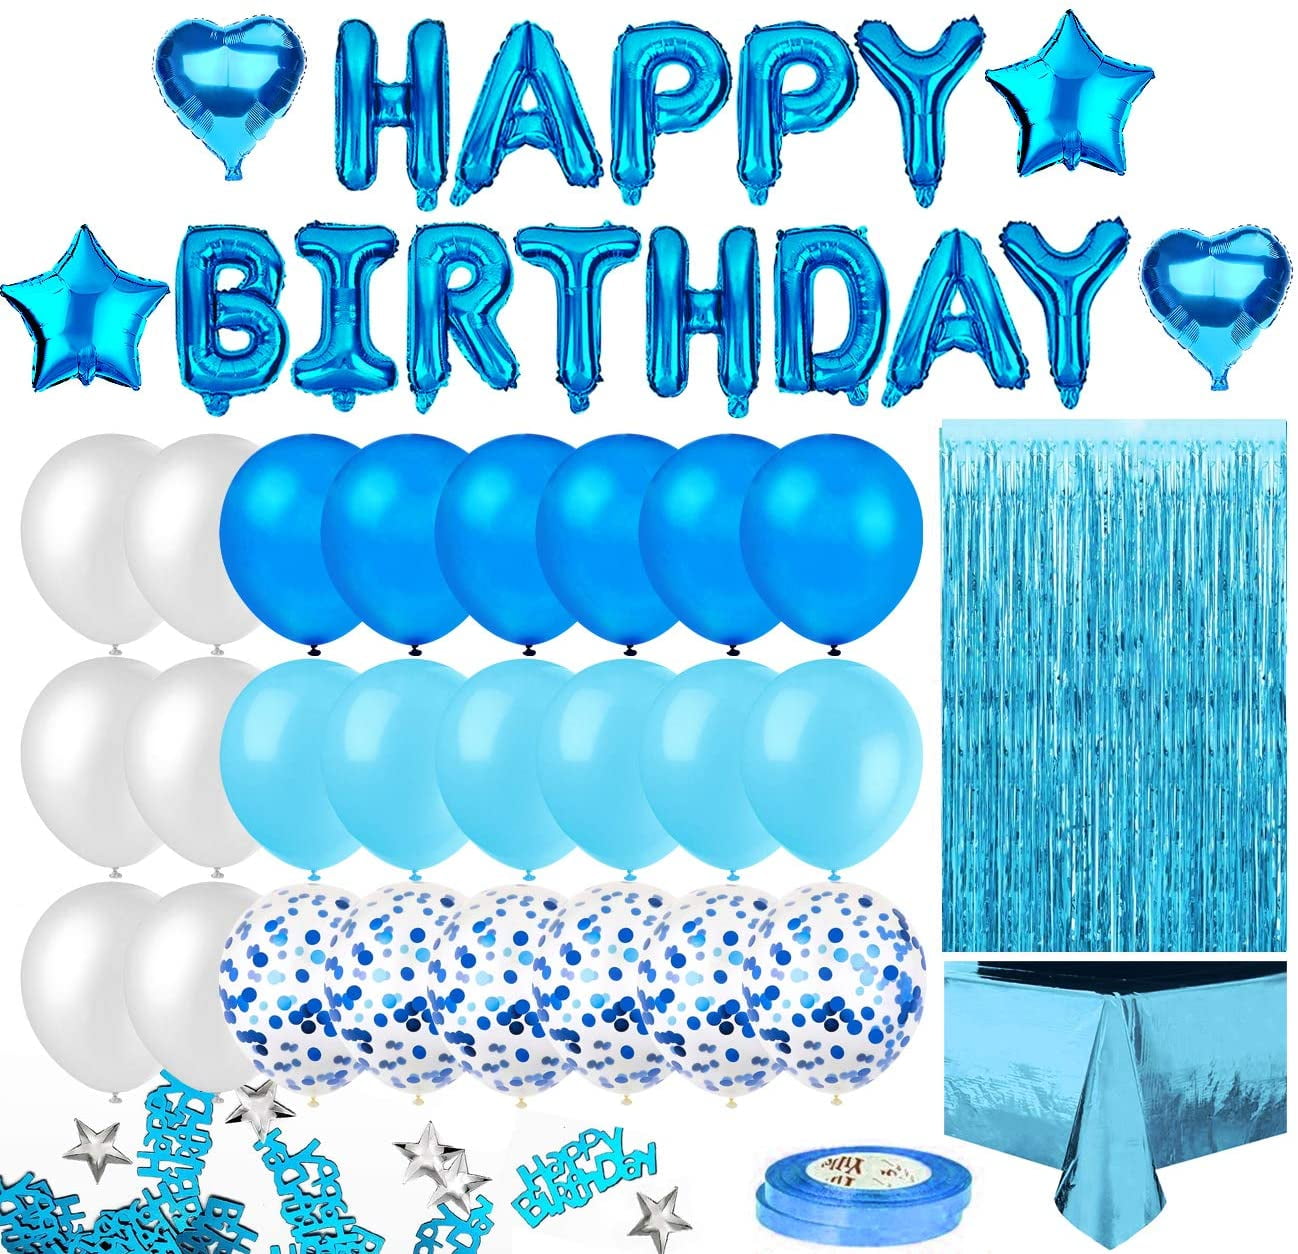 20" Blue Happy 60th Birthday Prismatic Foil Helium Balloon Party Decorations 